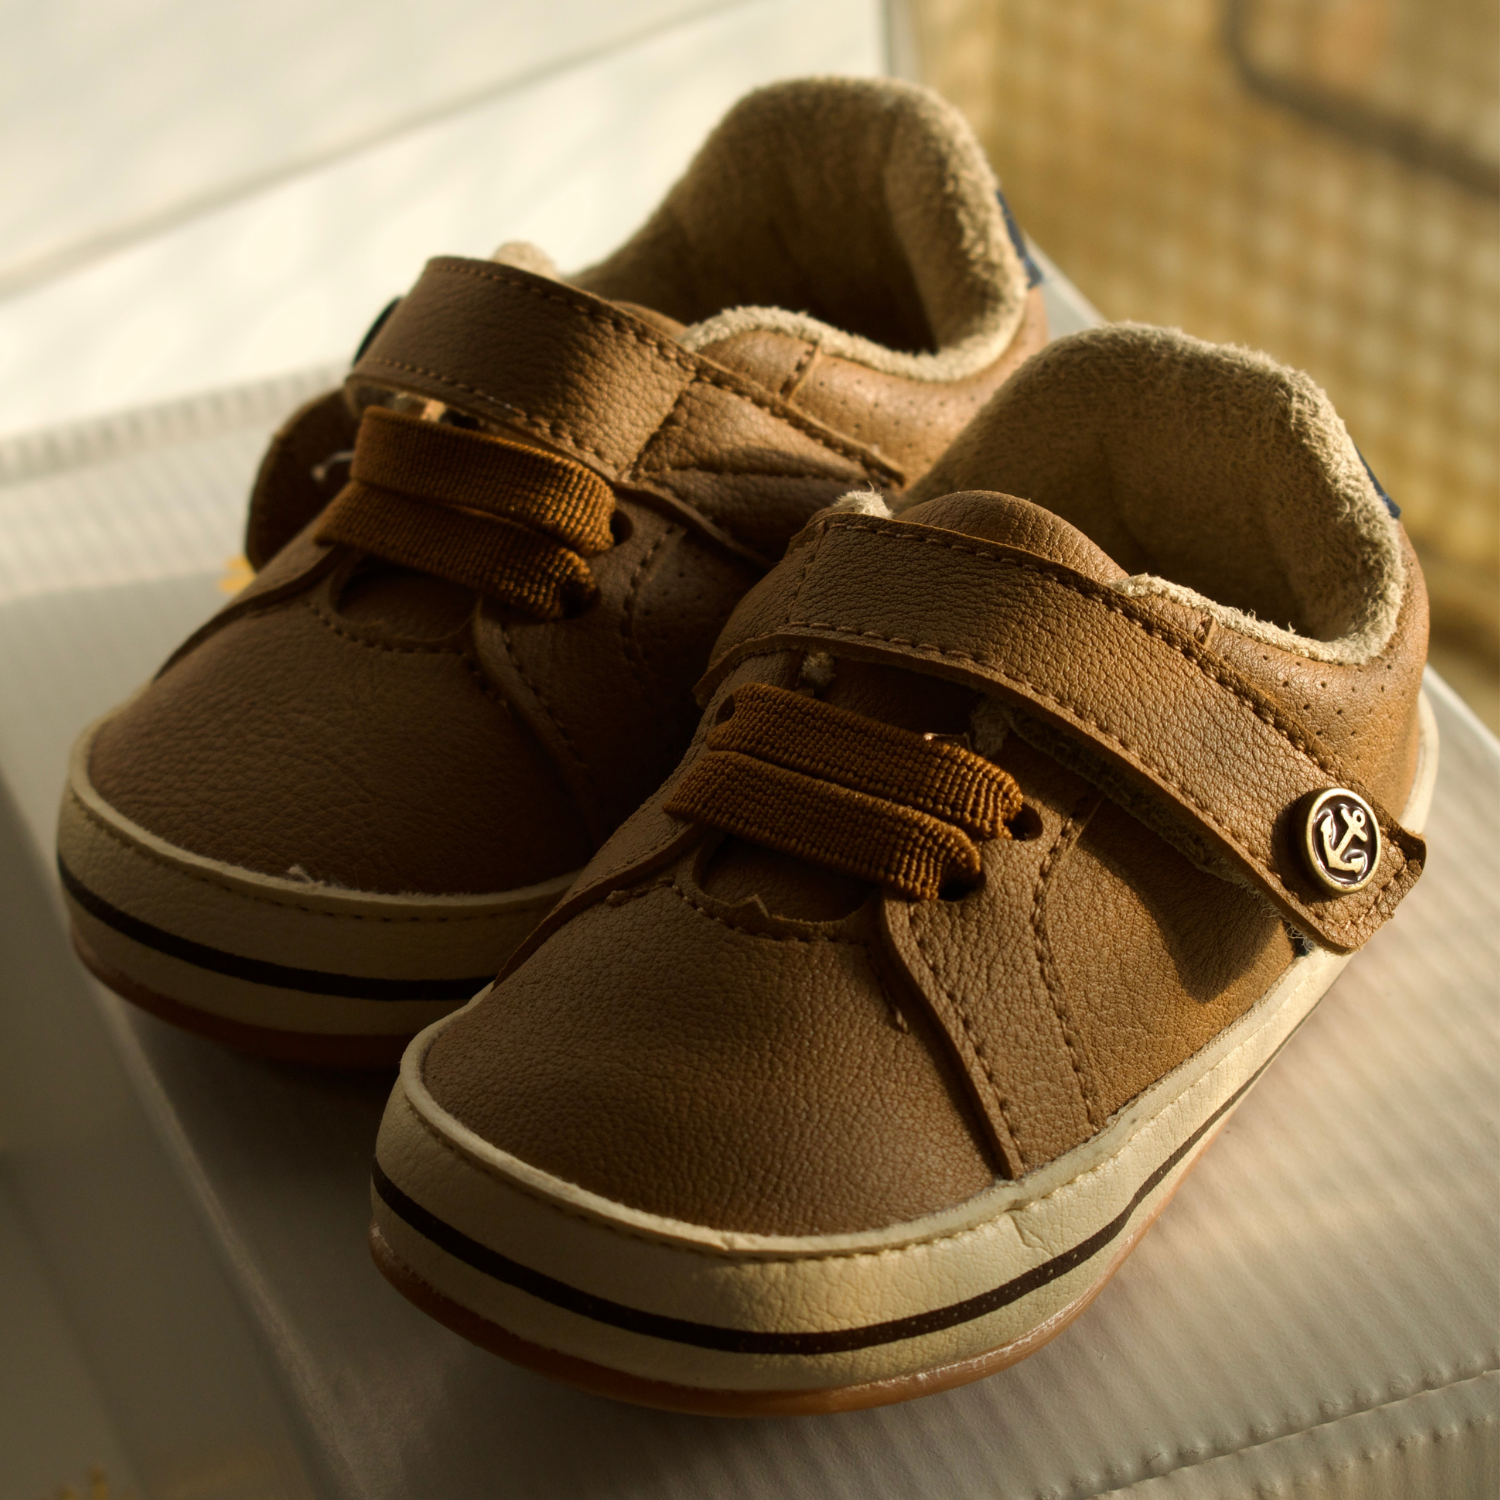 Baby Luca's Shoes